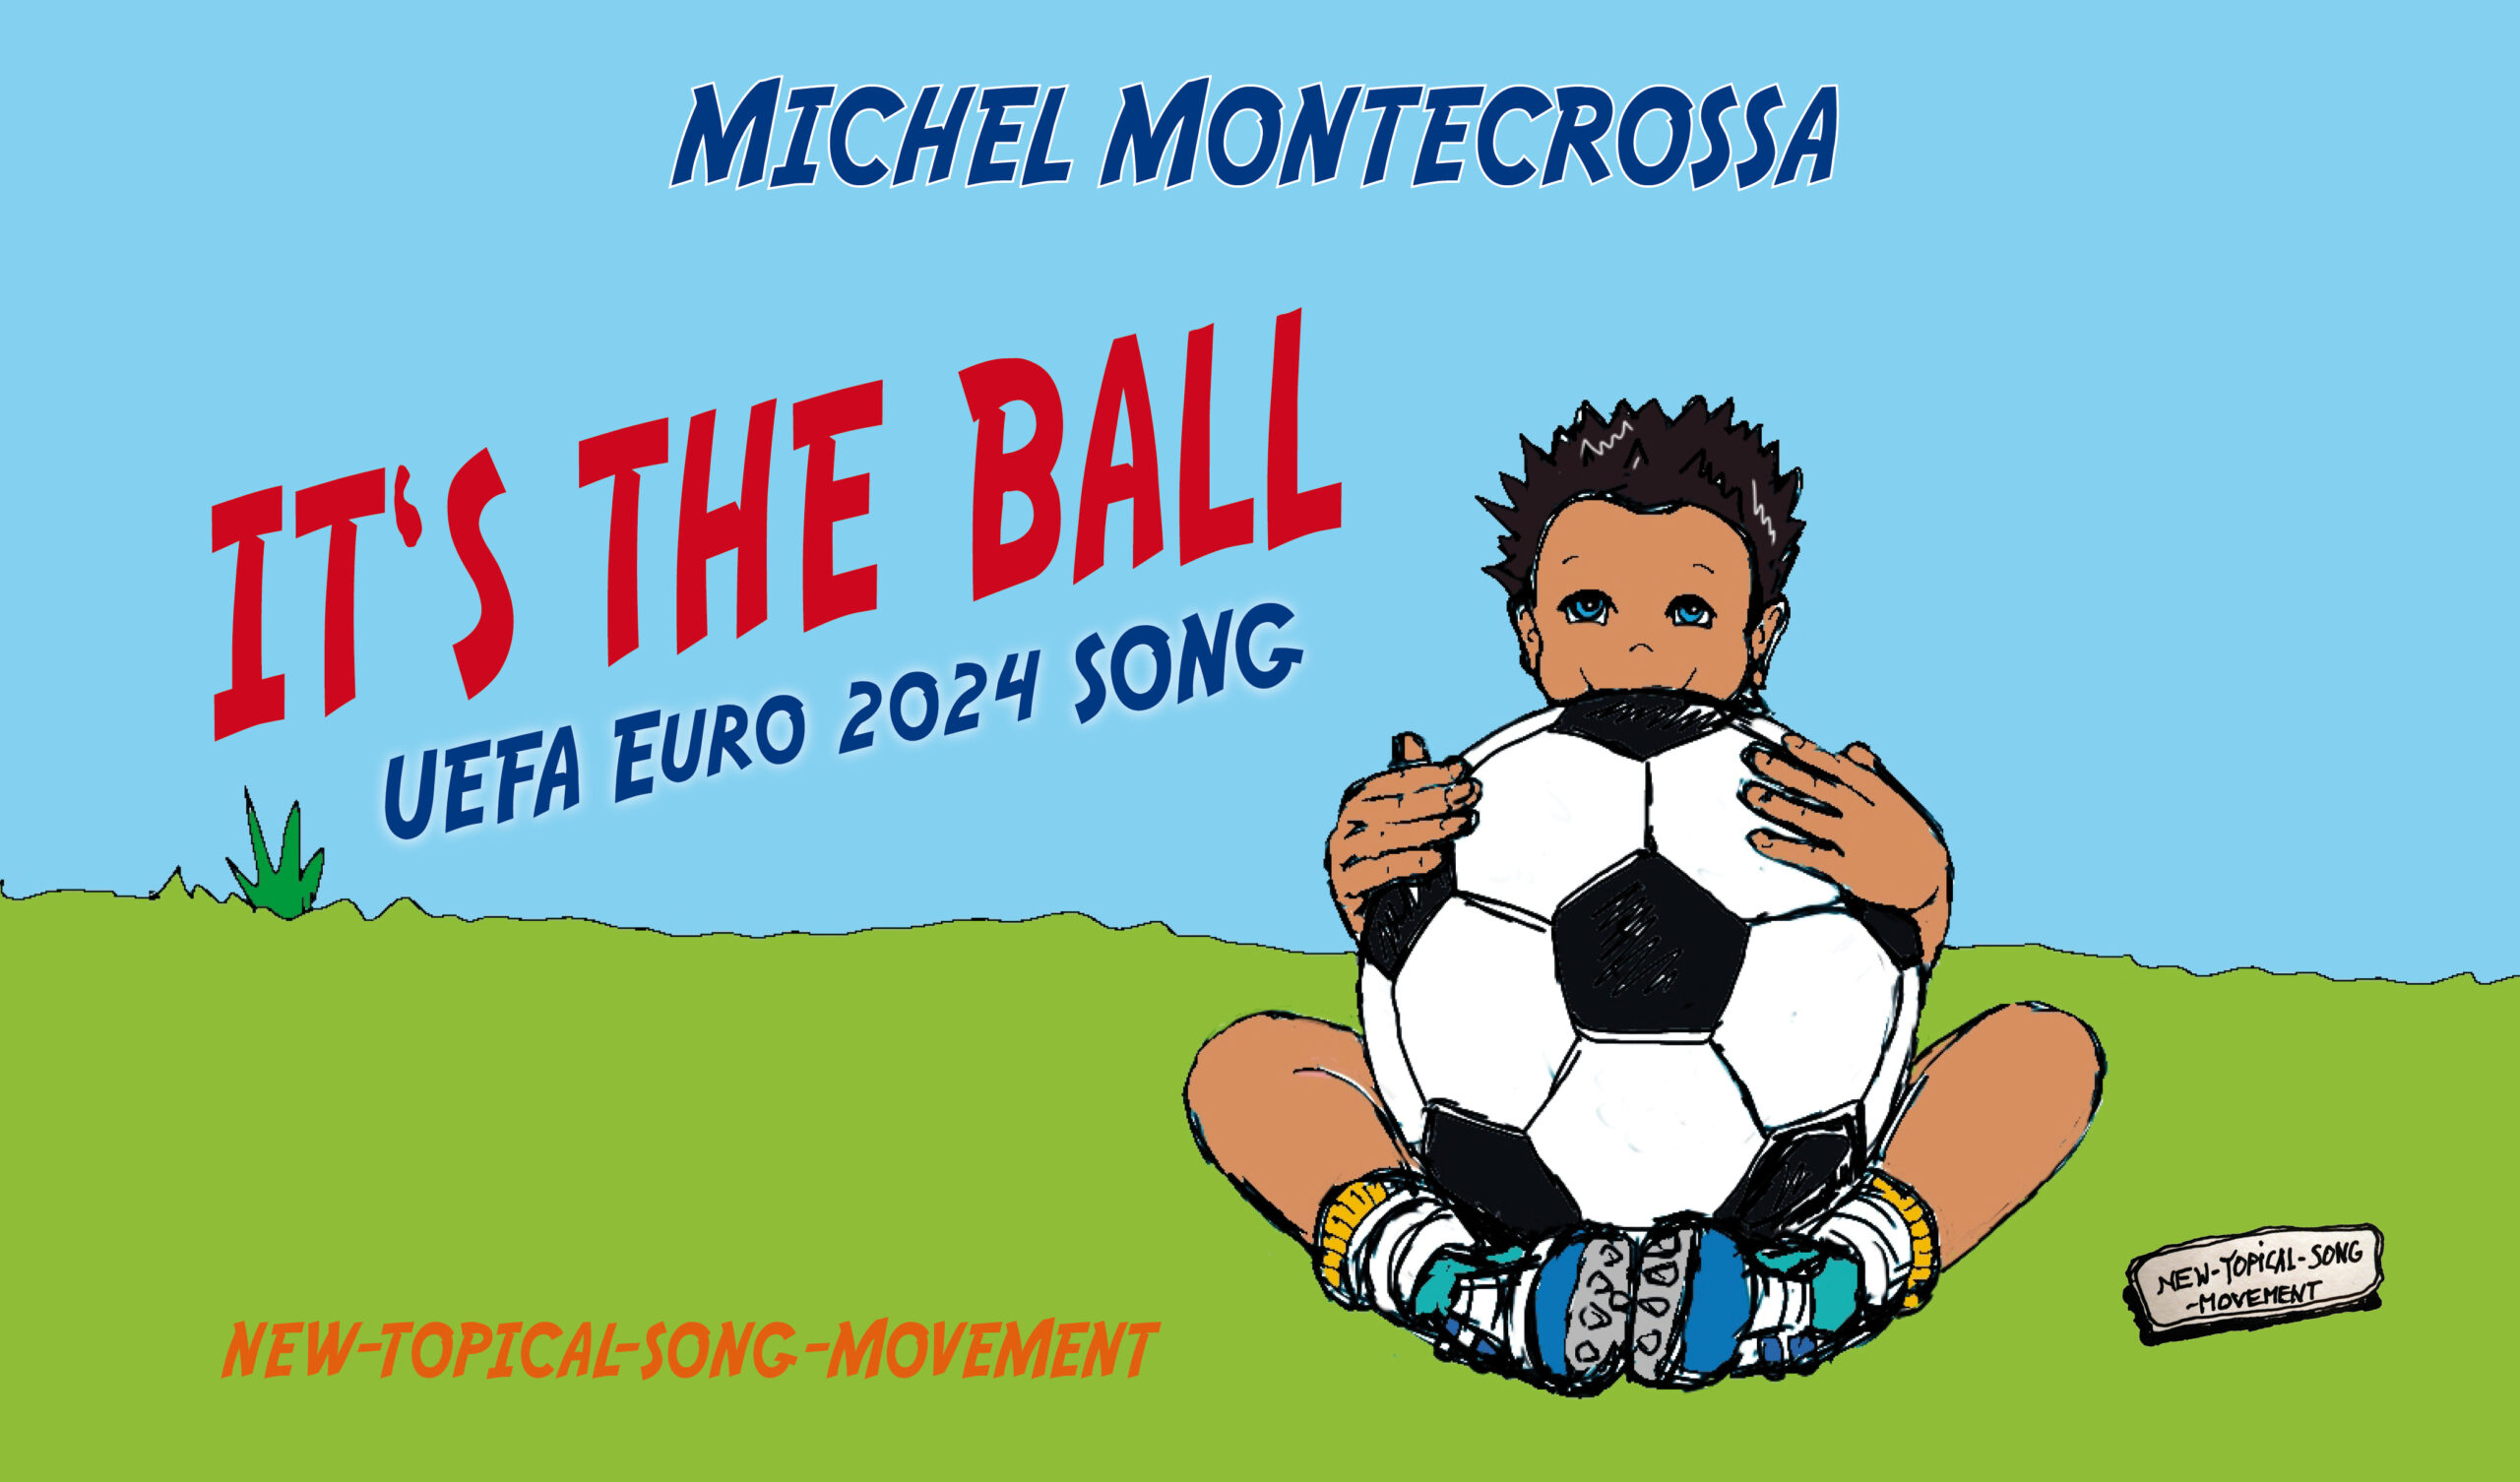 It's The Ball - UEFA Euro 2024 song by Michel Montecrossa